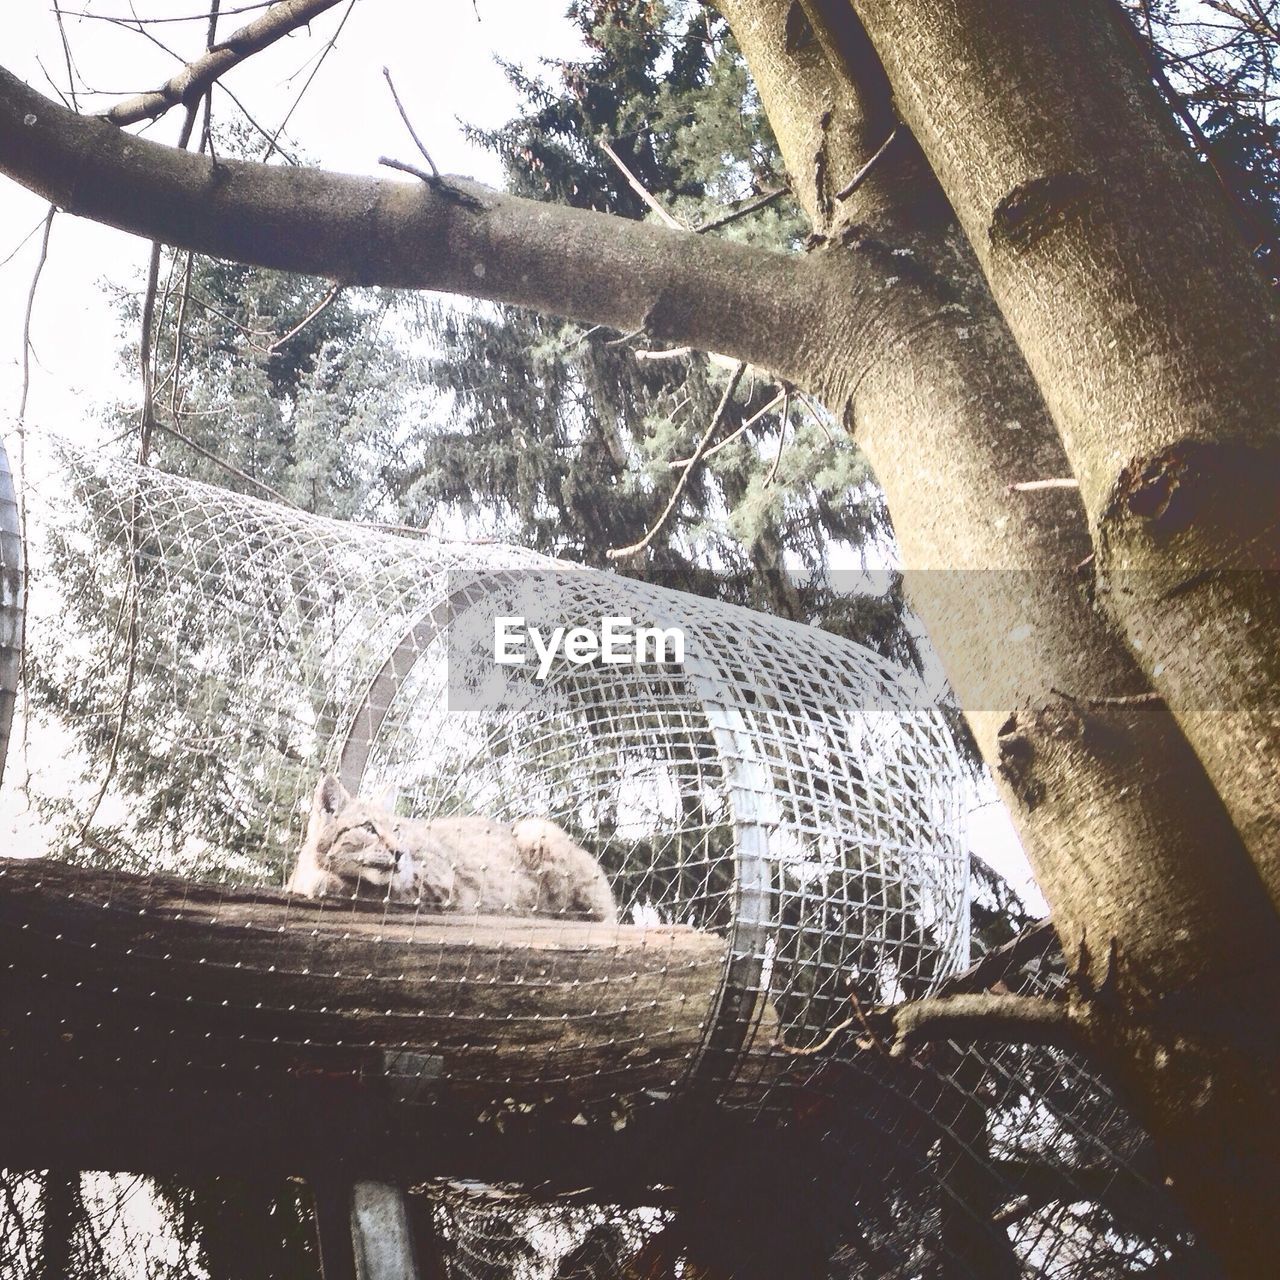 Low angle view of lynx in cage at zoo